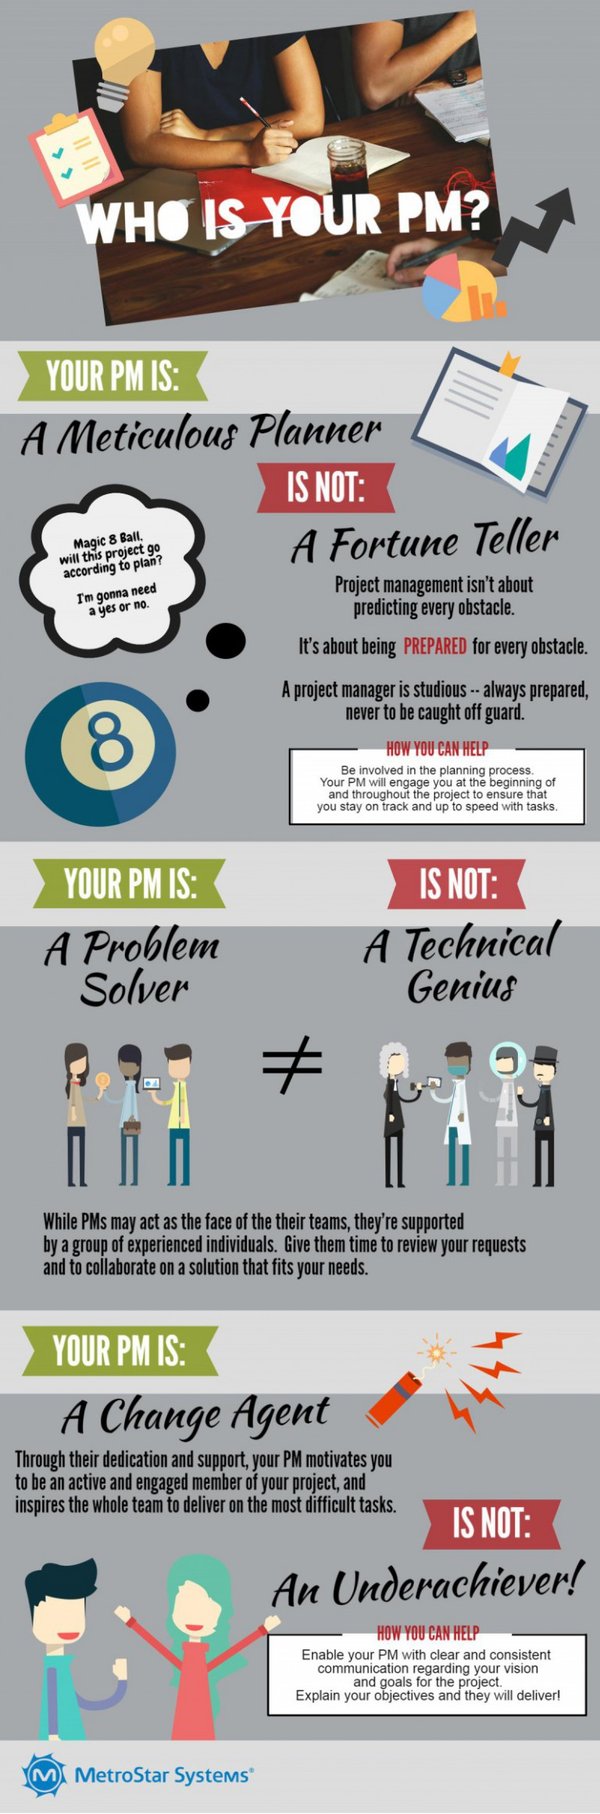 who is your project manager (PM) infographic